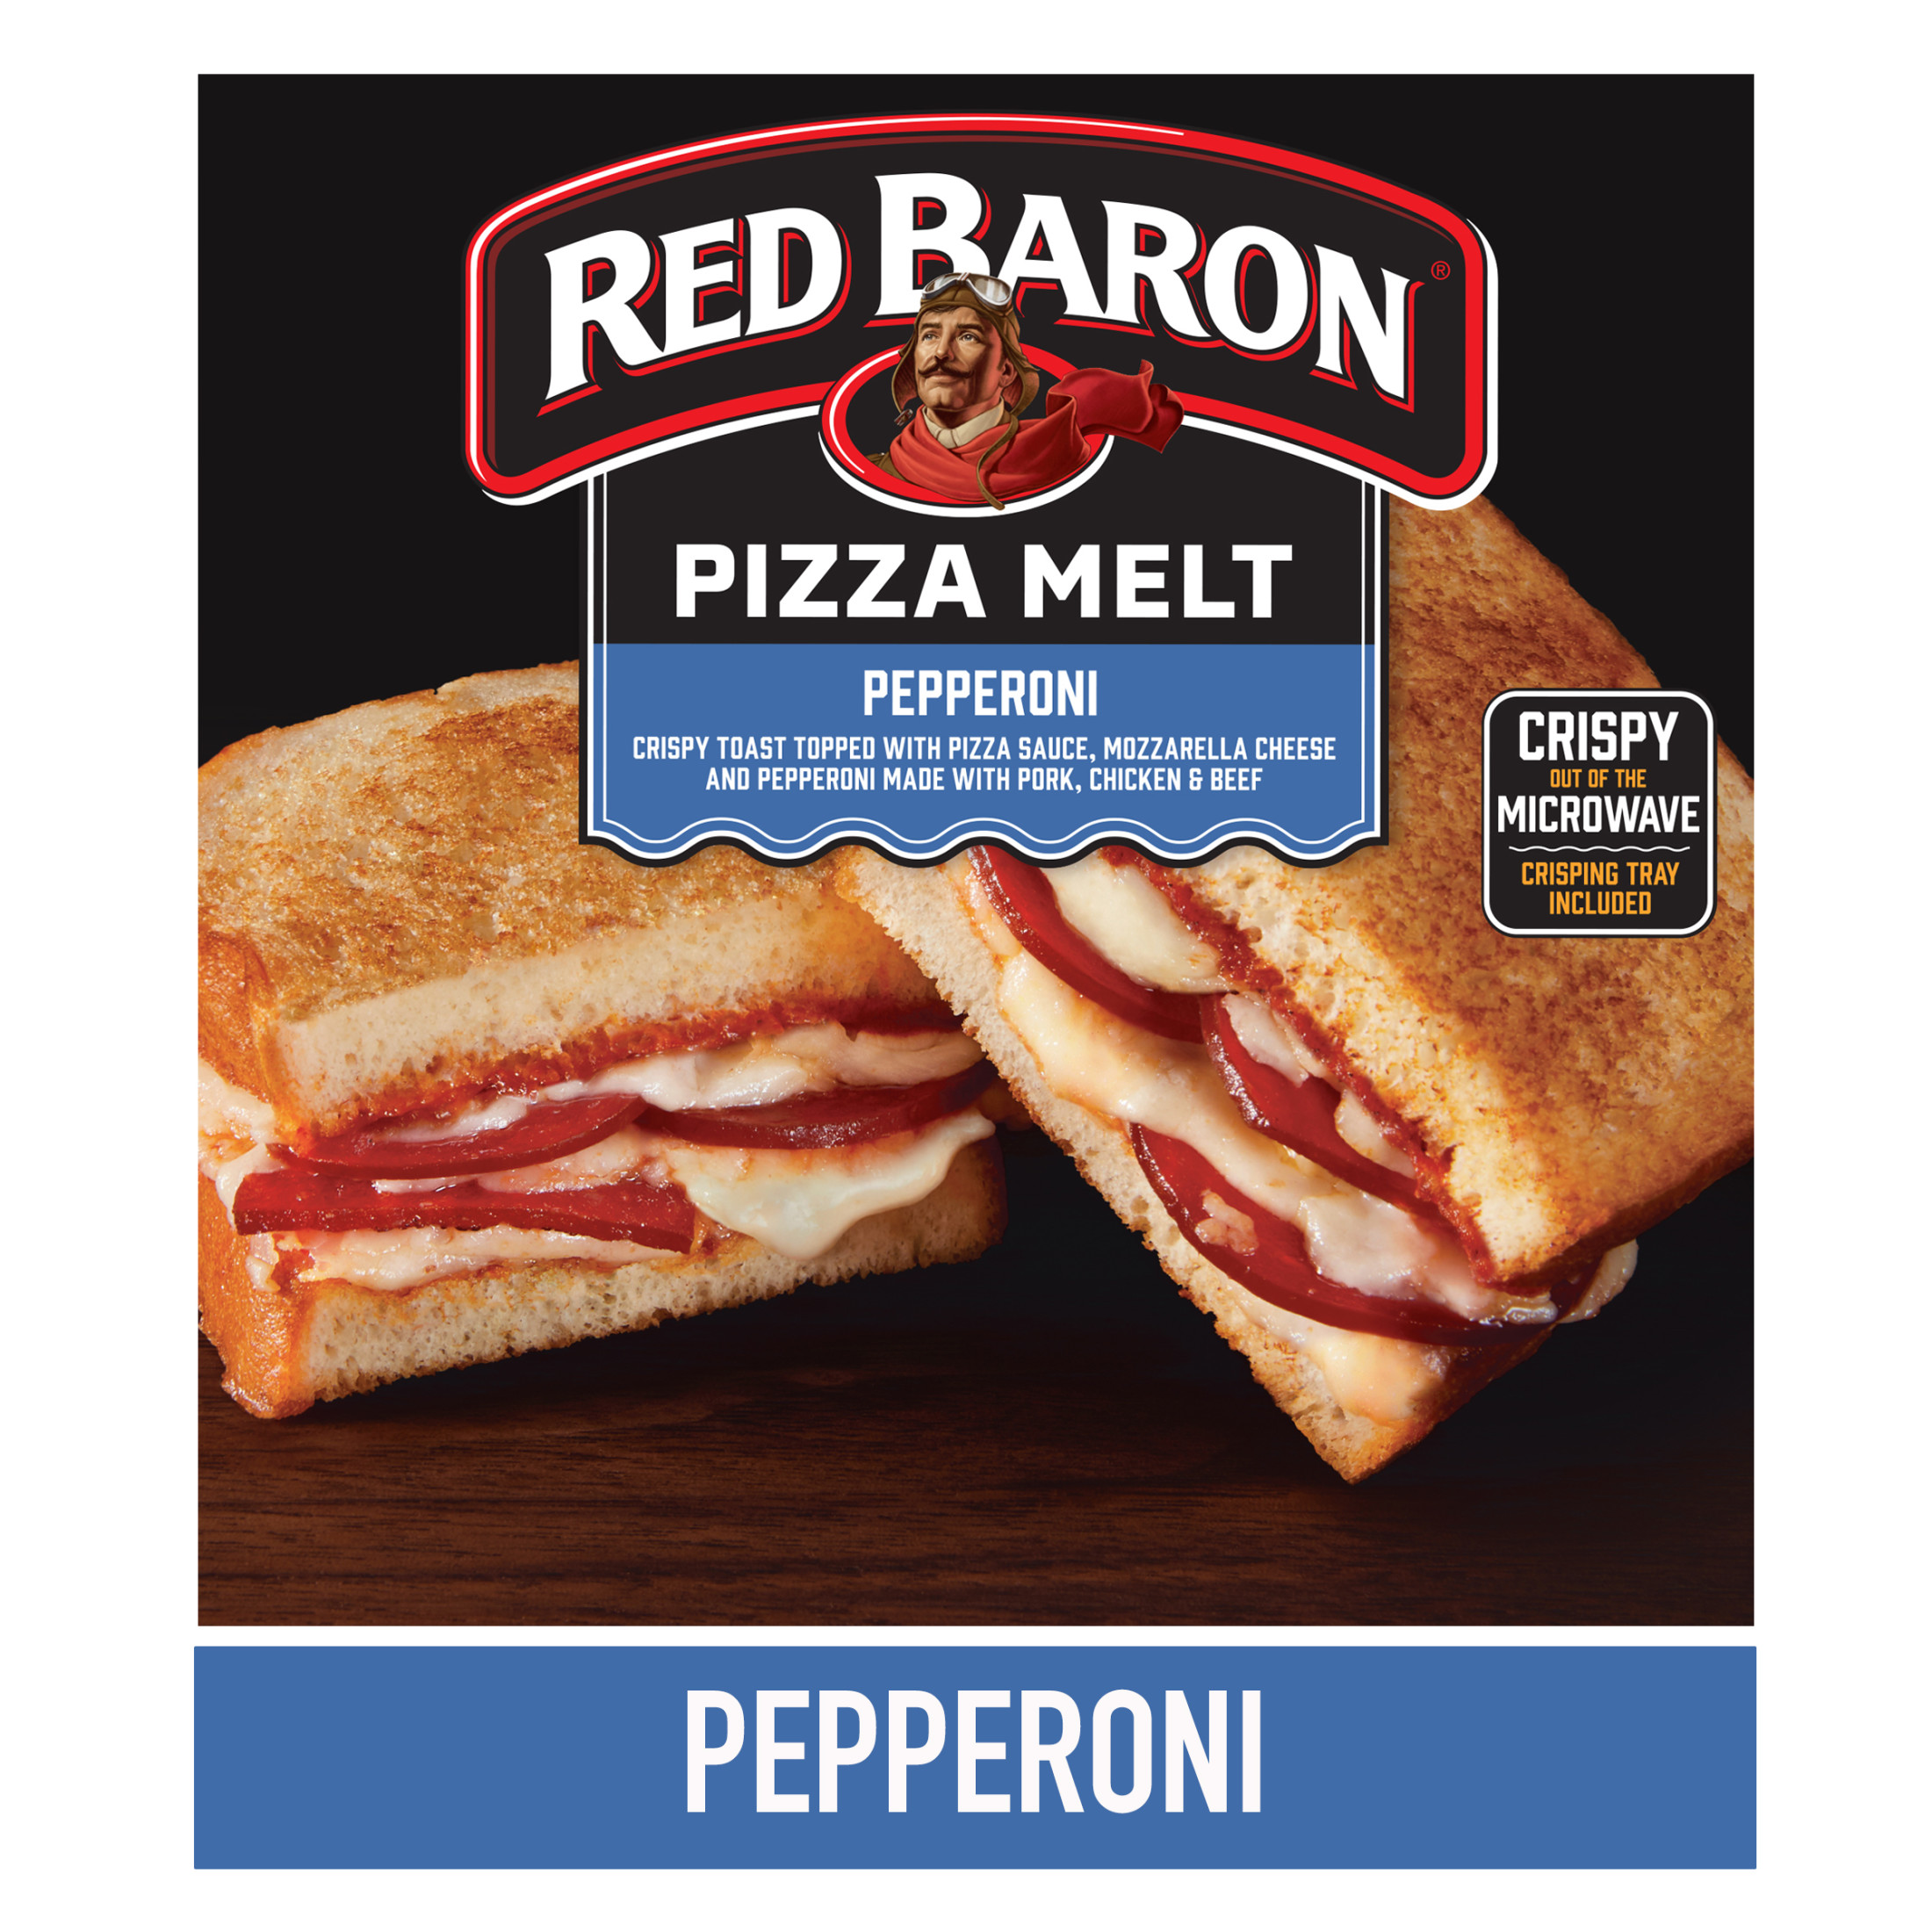 Red Baron Frozen Pizza Pizza Melt Pepperoni, 5.34 oz - image 3 of 14